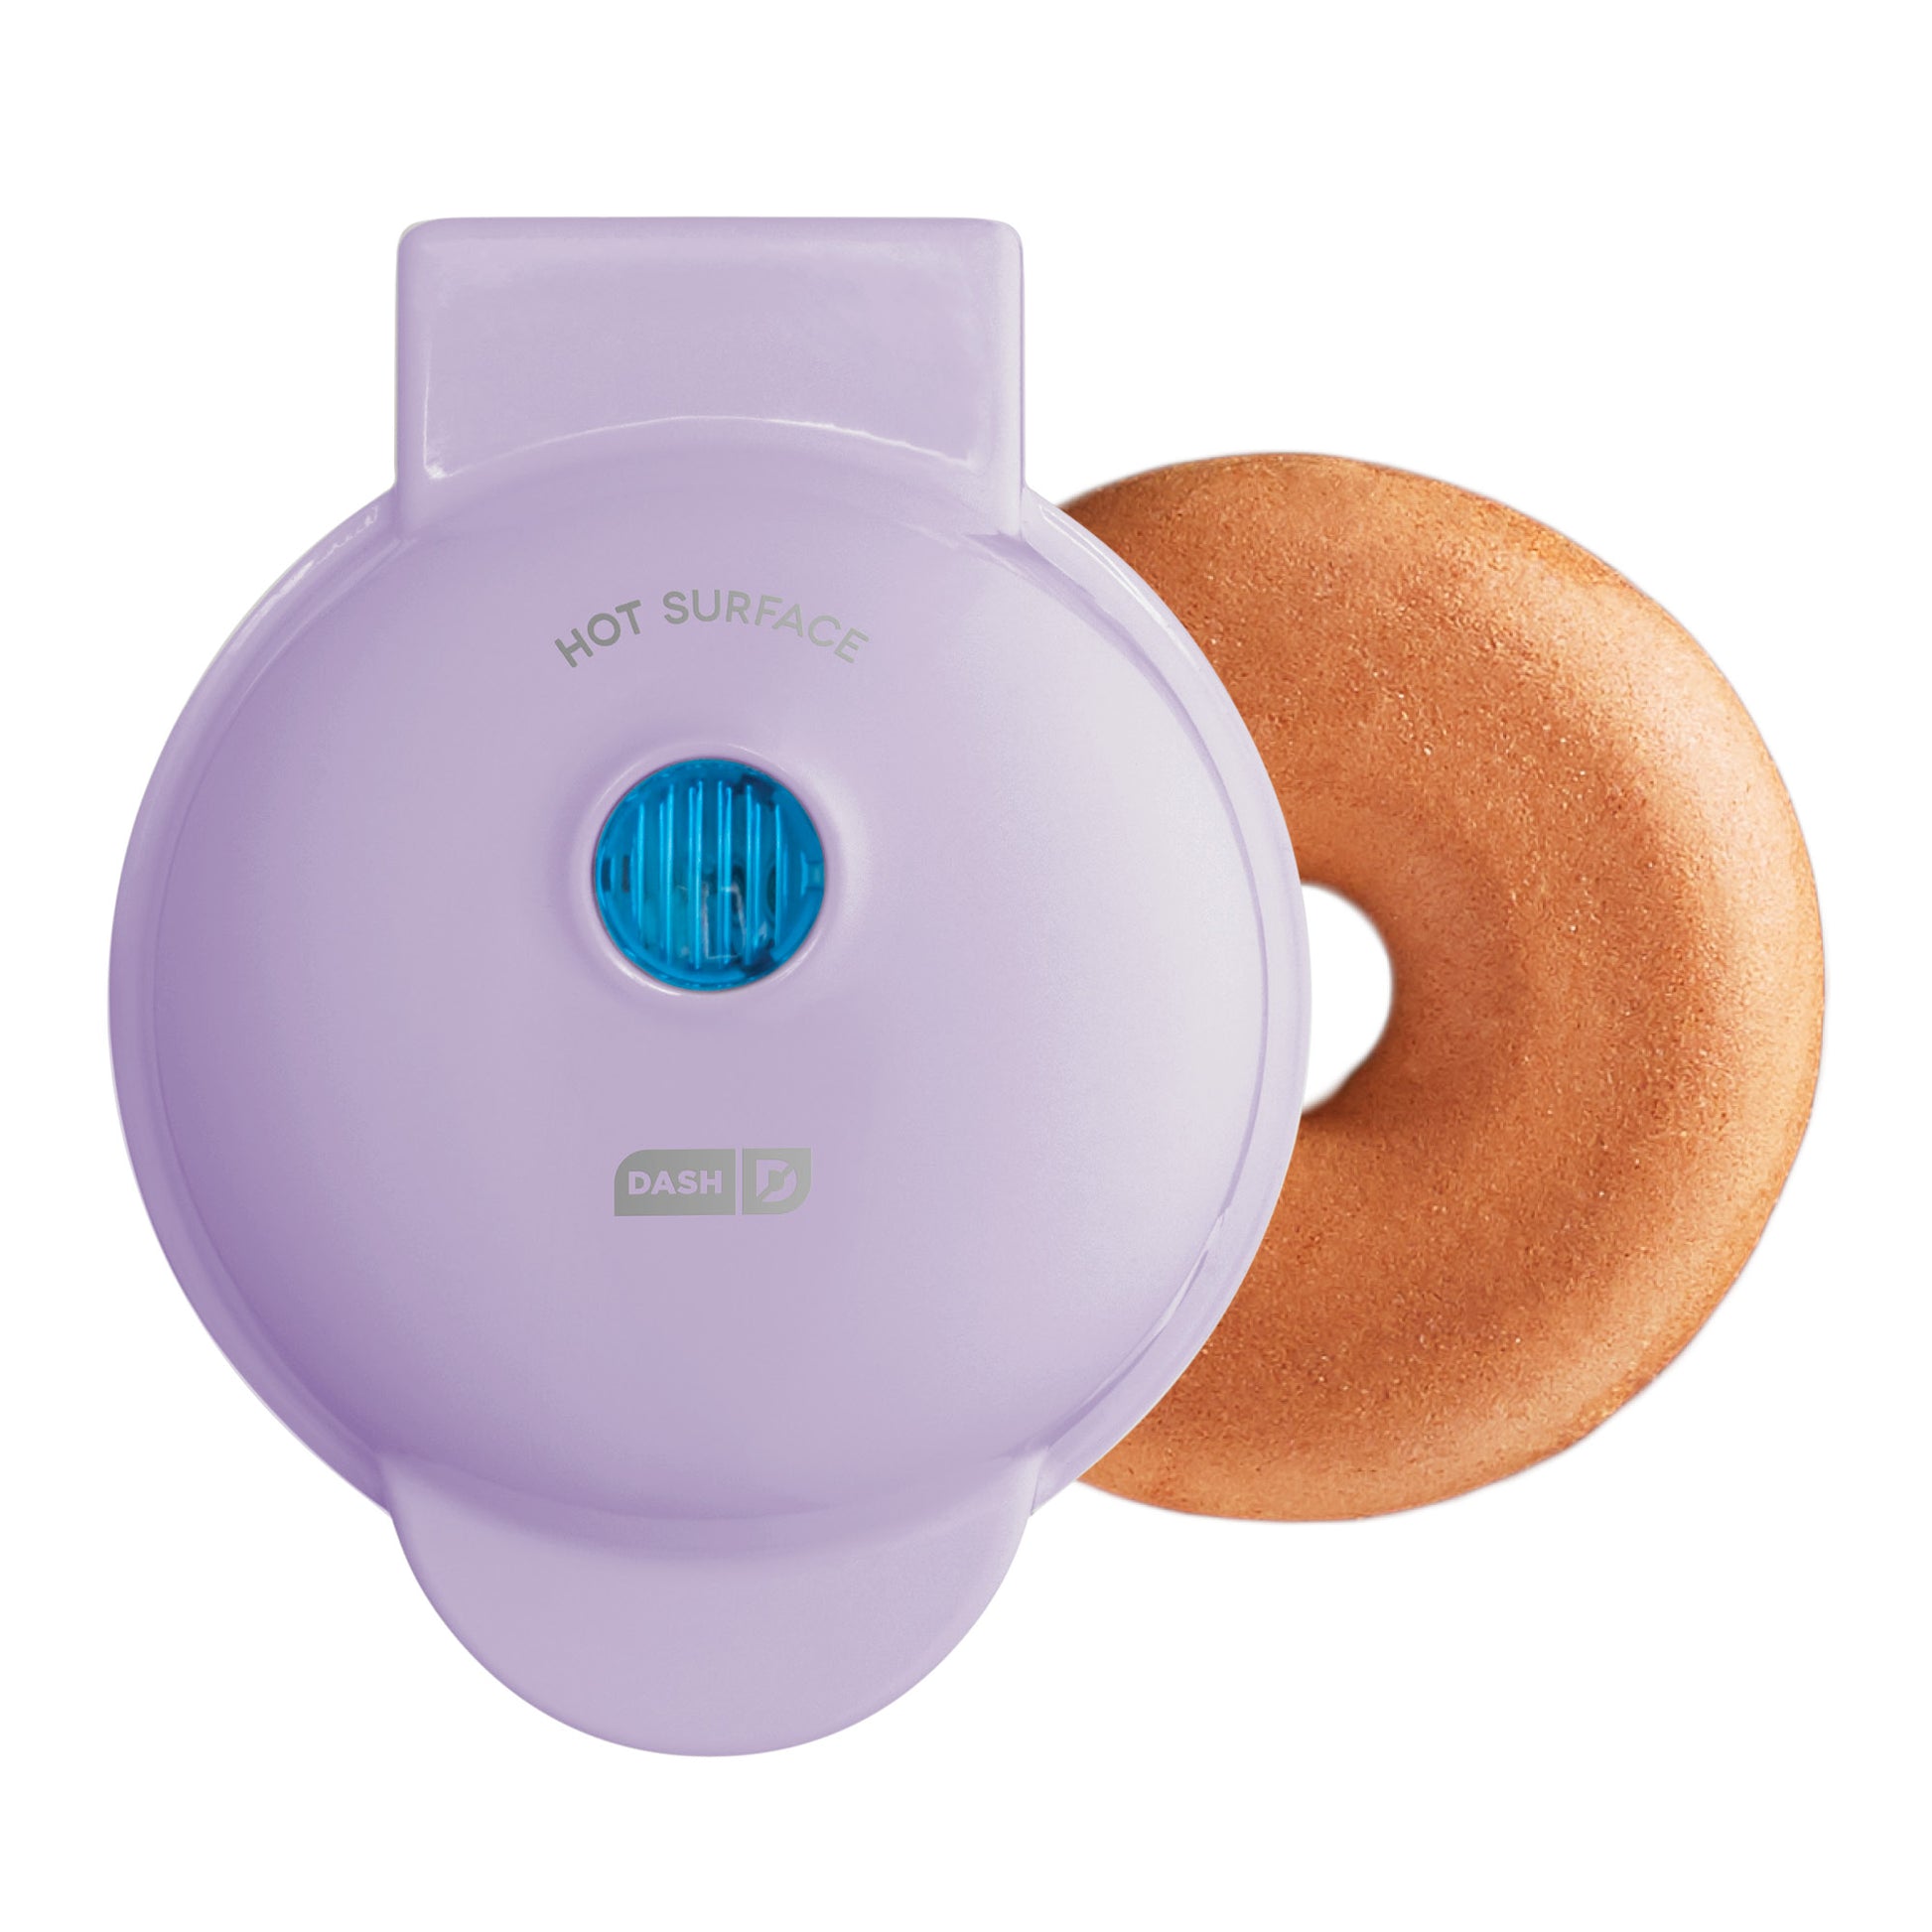 New Dash Mini Donut Maker from $13.99 + Free Shipping for Select